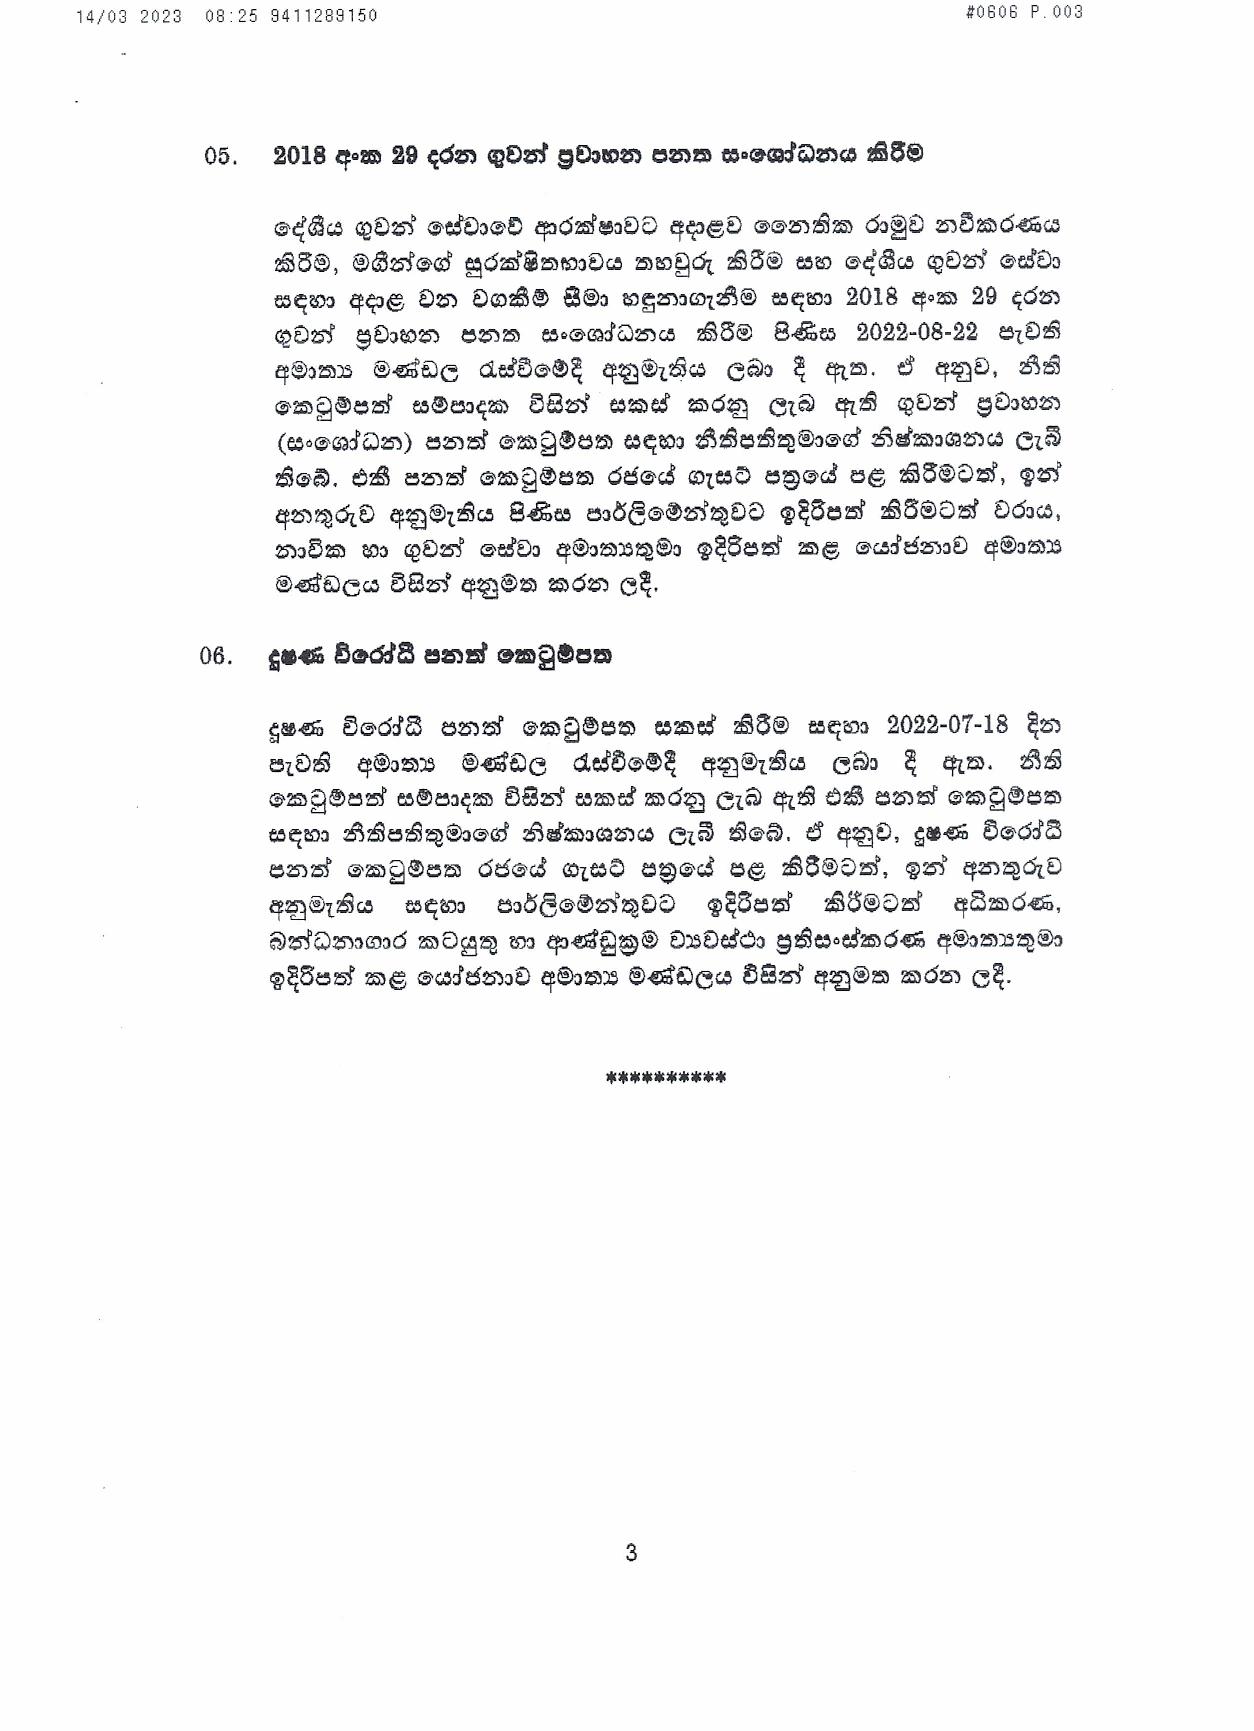 Cabinet Decision on 13.03.2023 page 003